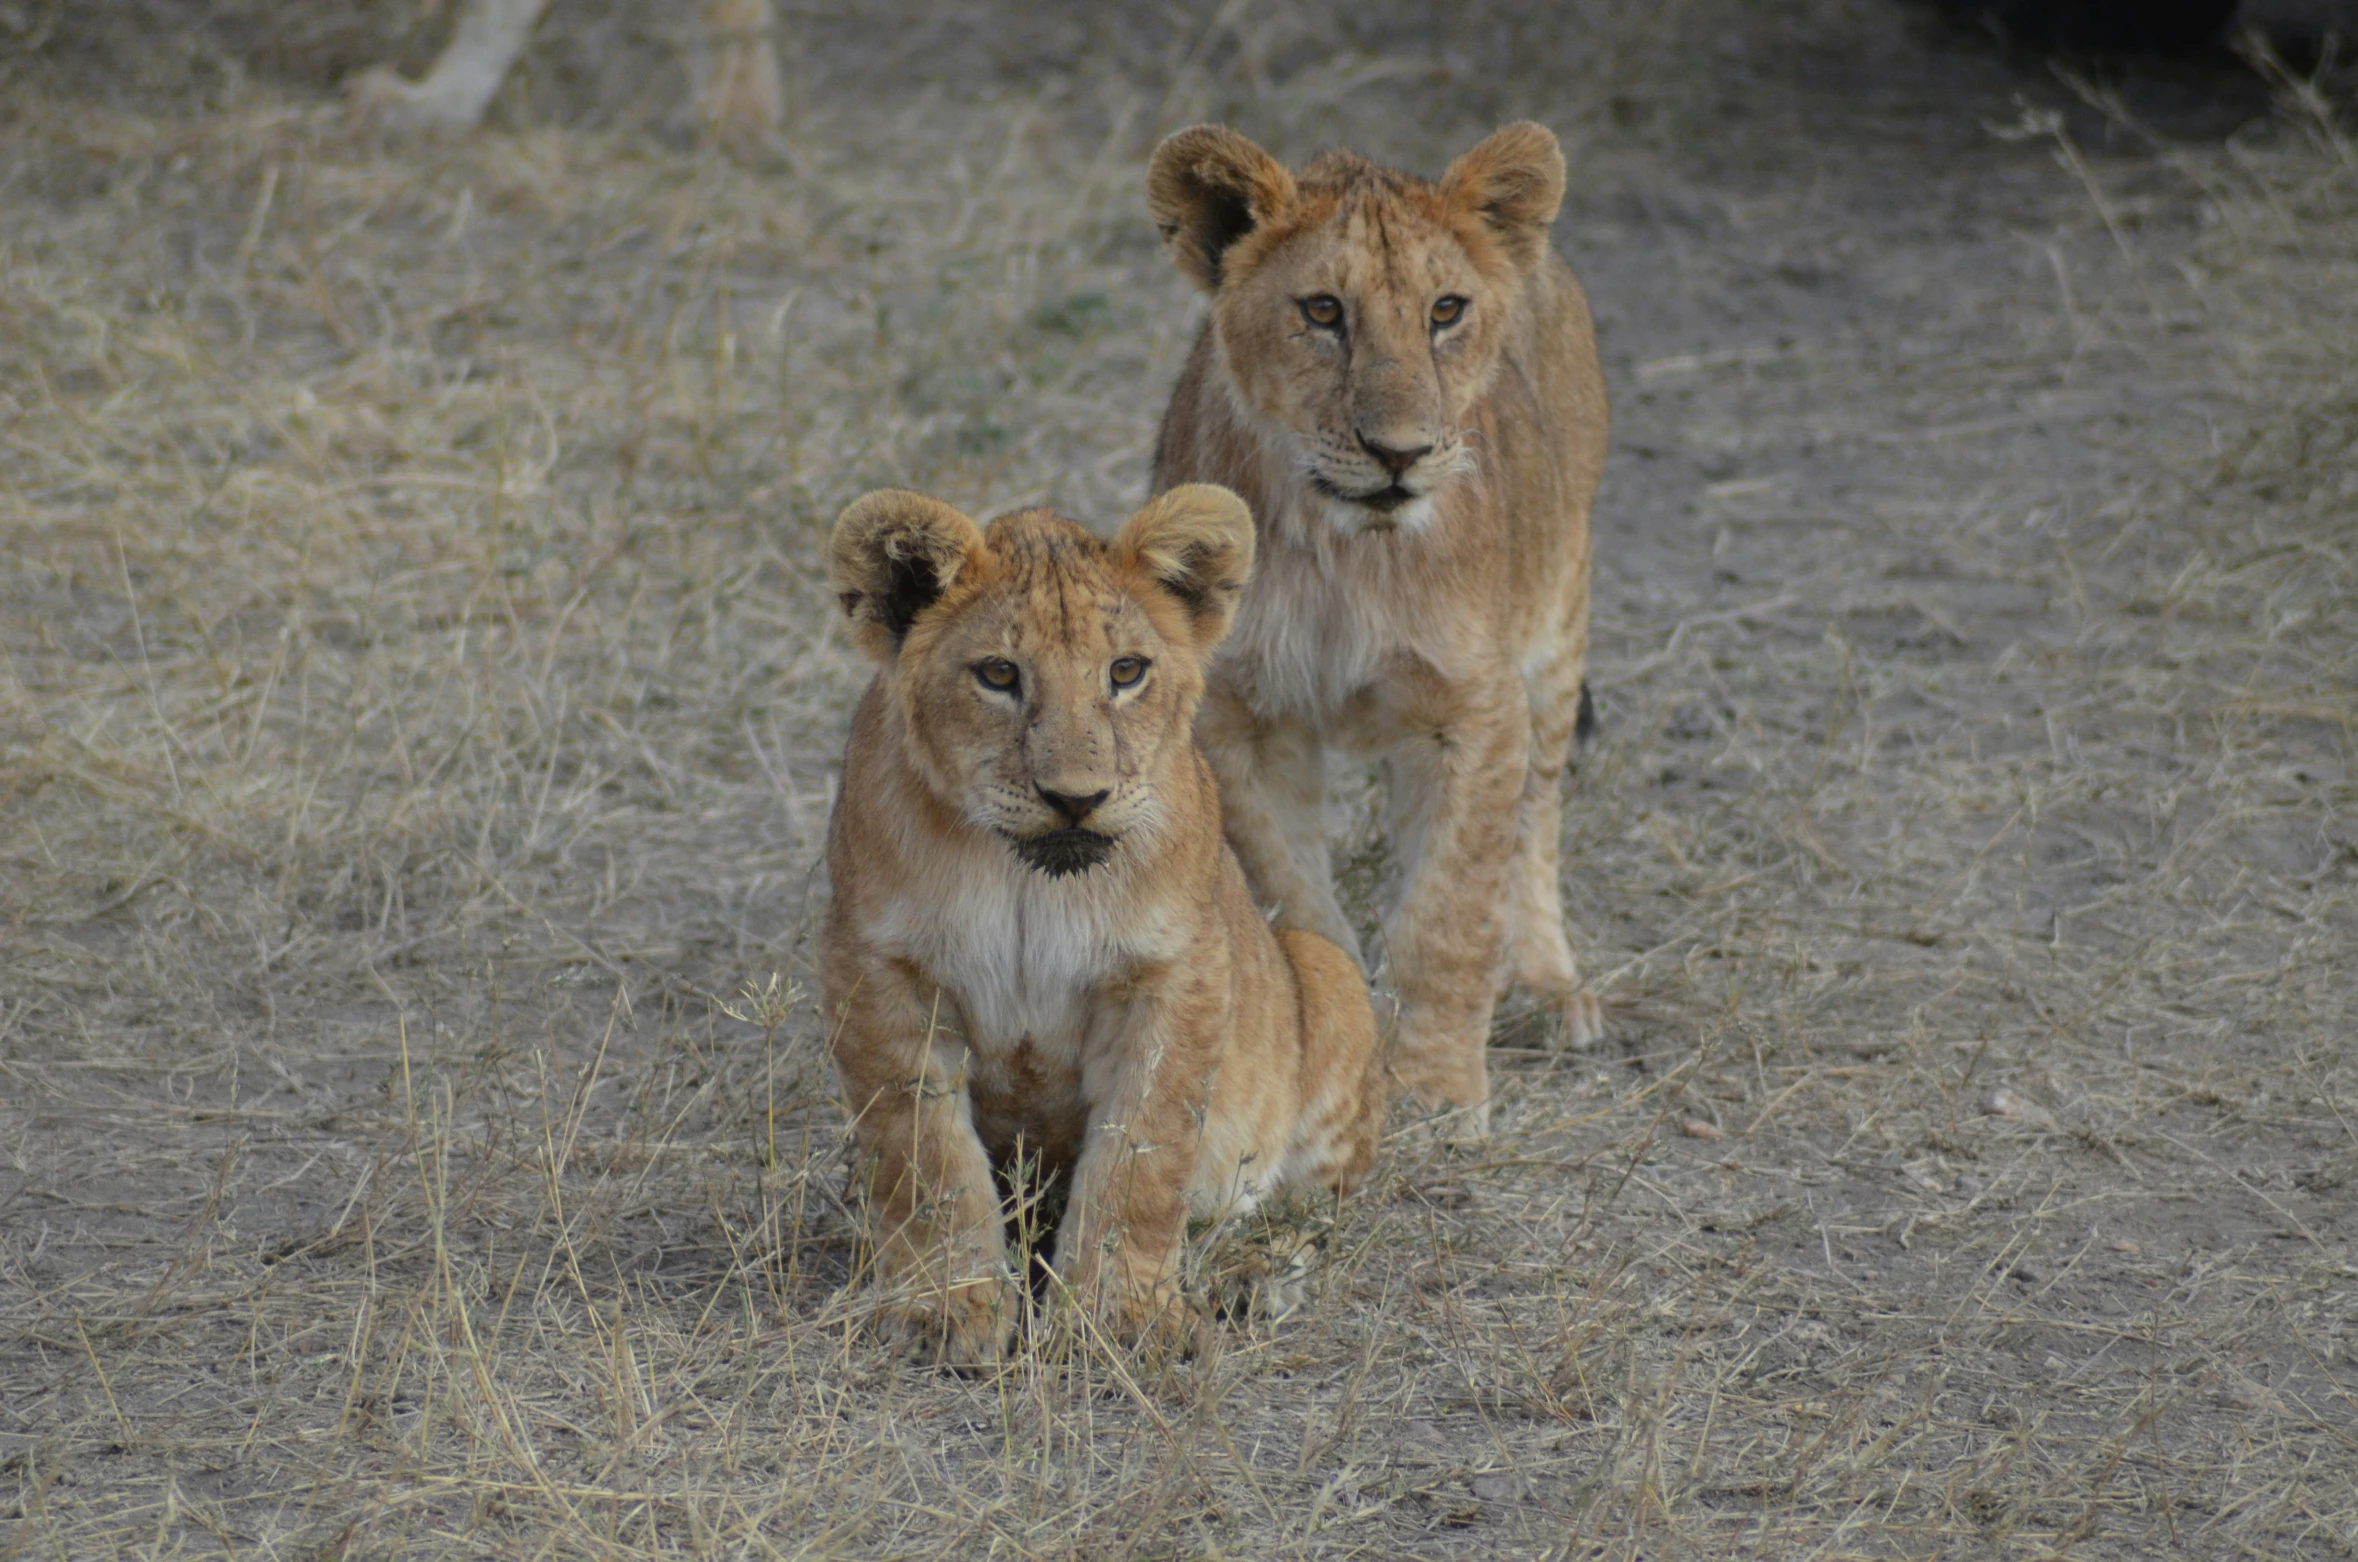 two young lions in the grass with one adult